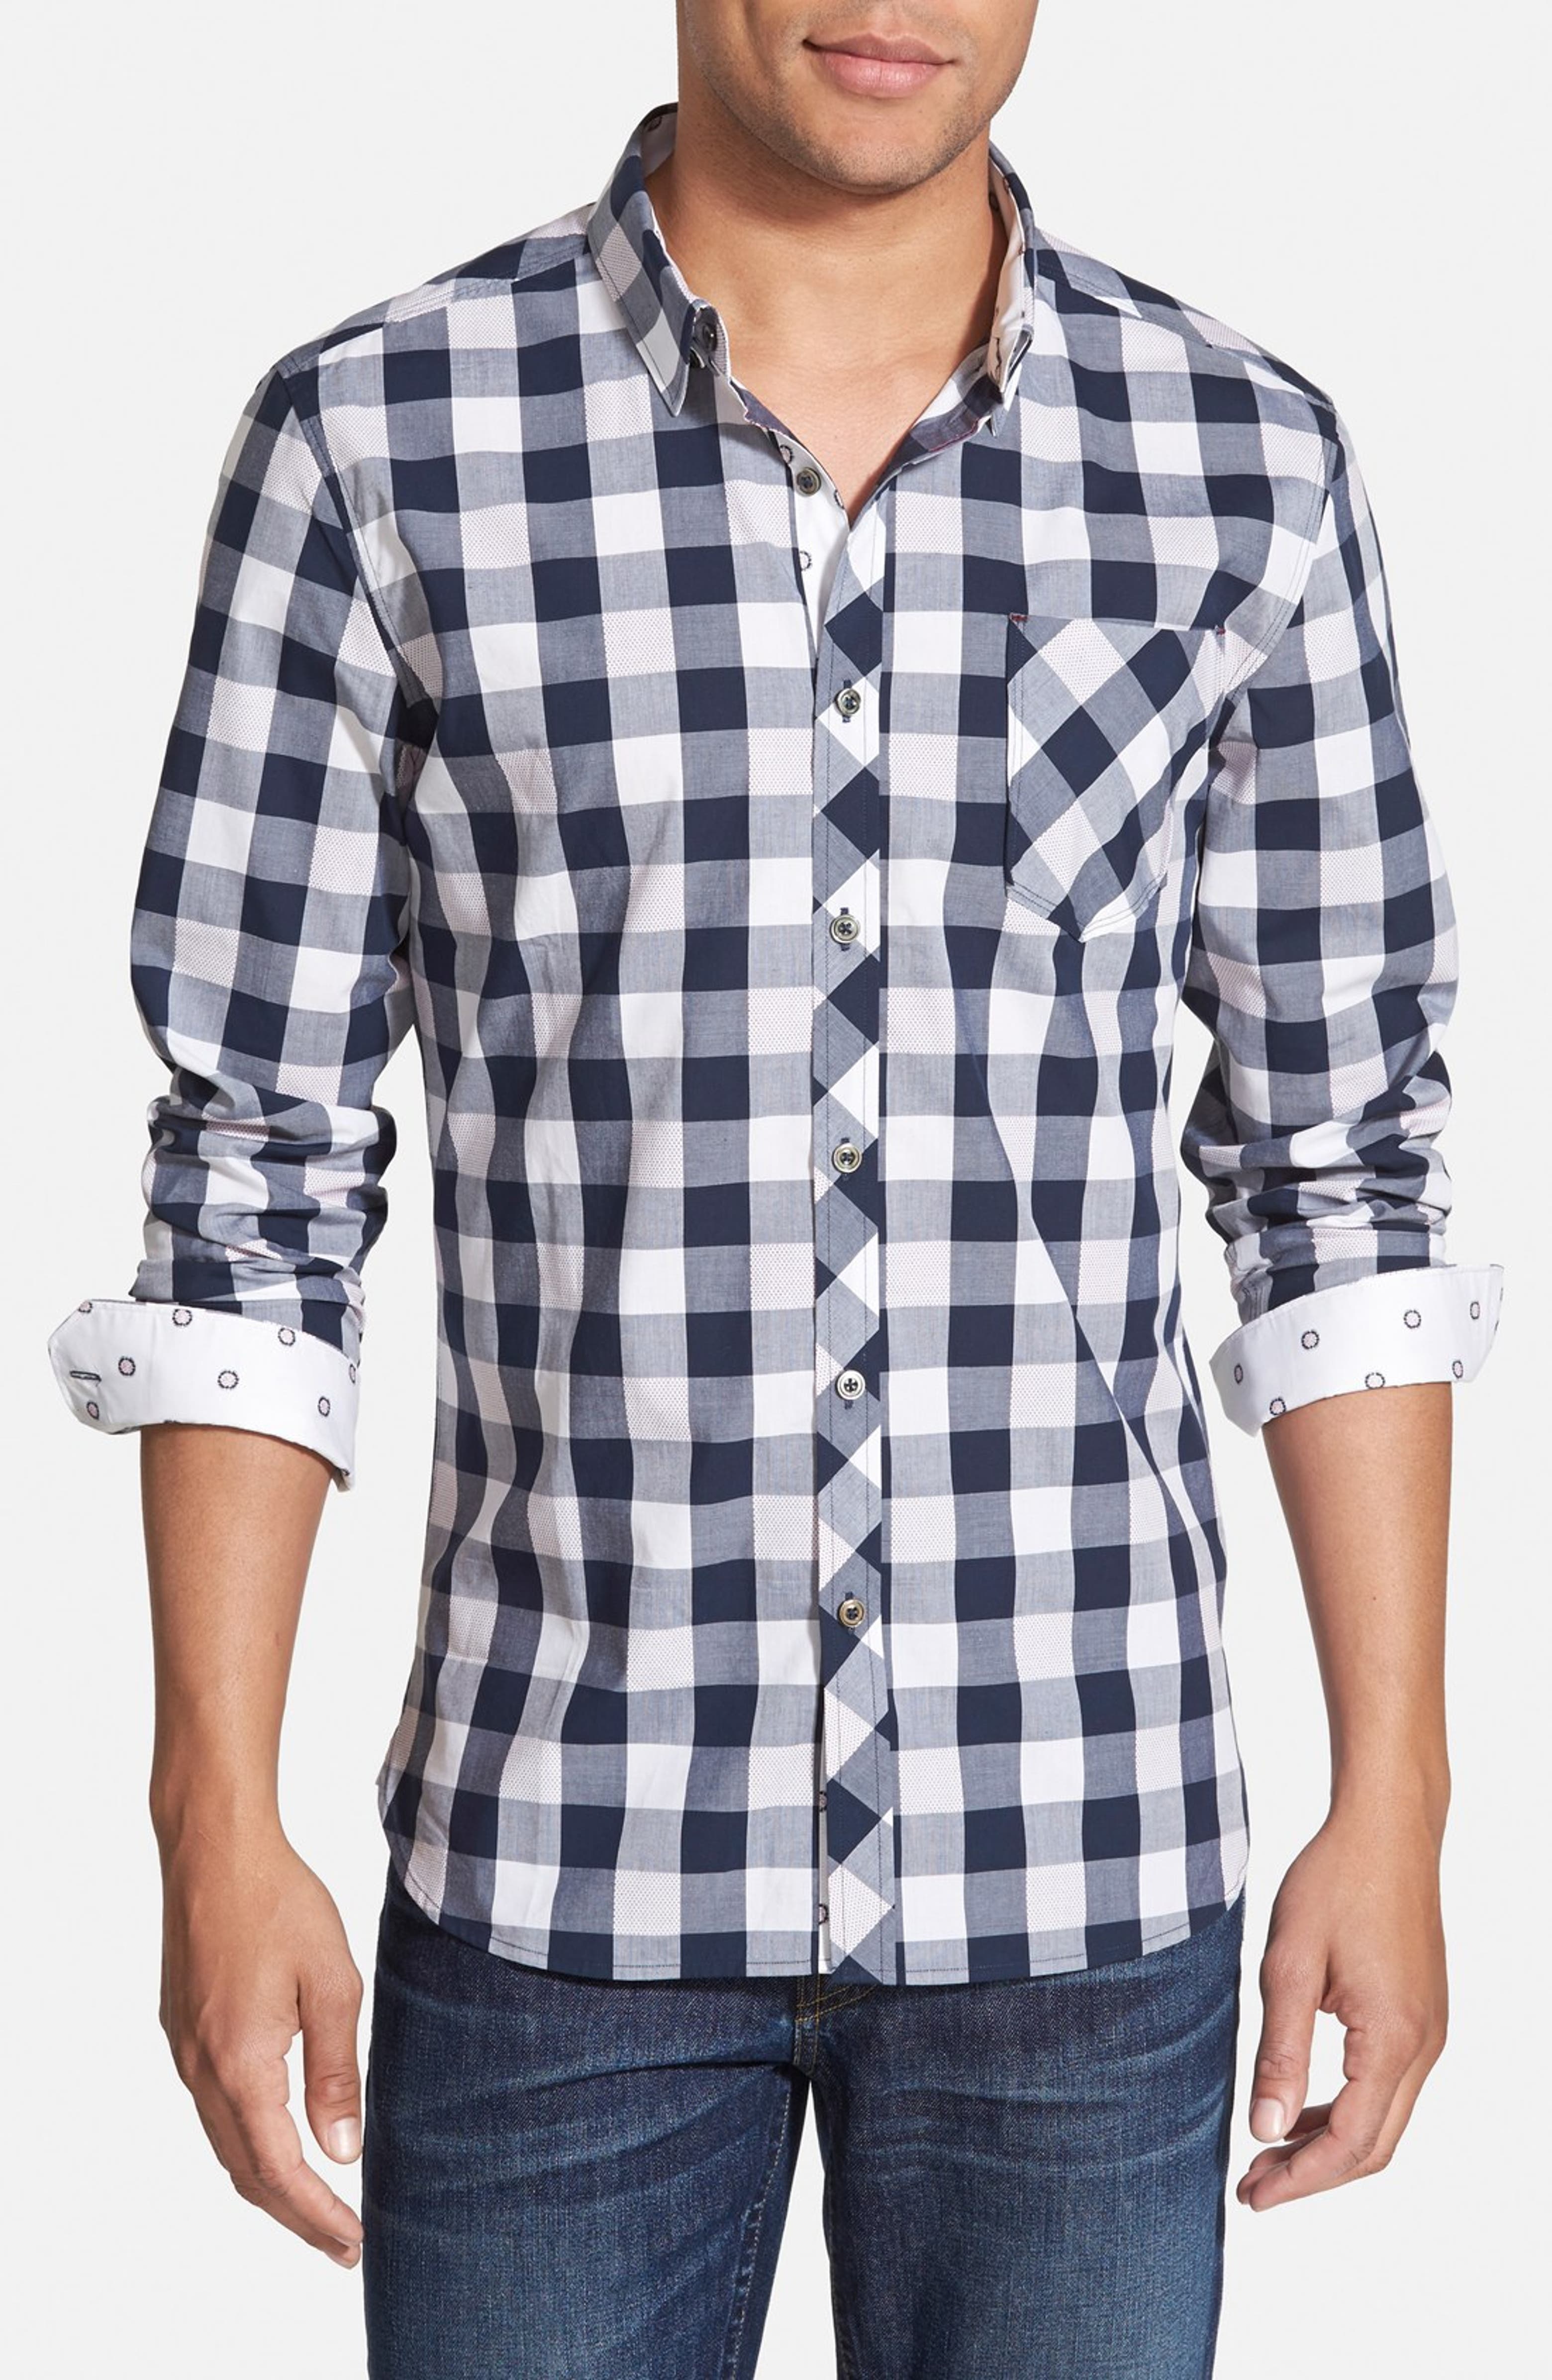 7 Diamonds 'One of A Kind' Trim Fit Check Woven Shirt | Nordstrom